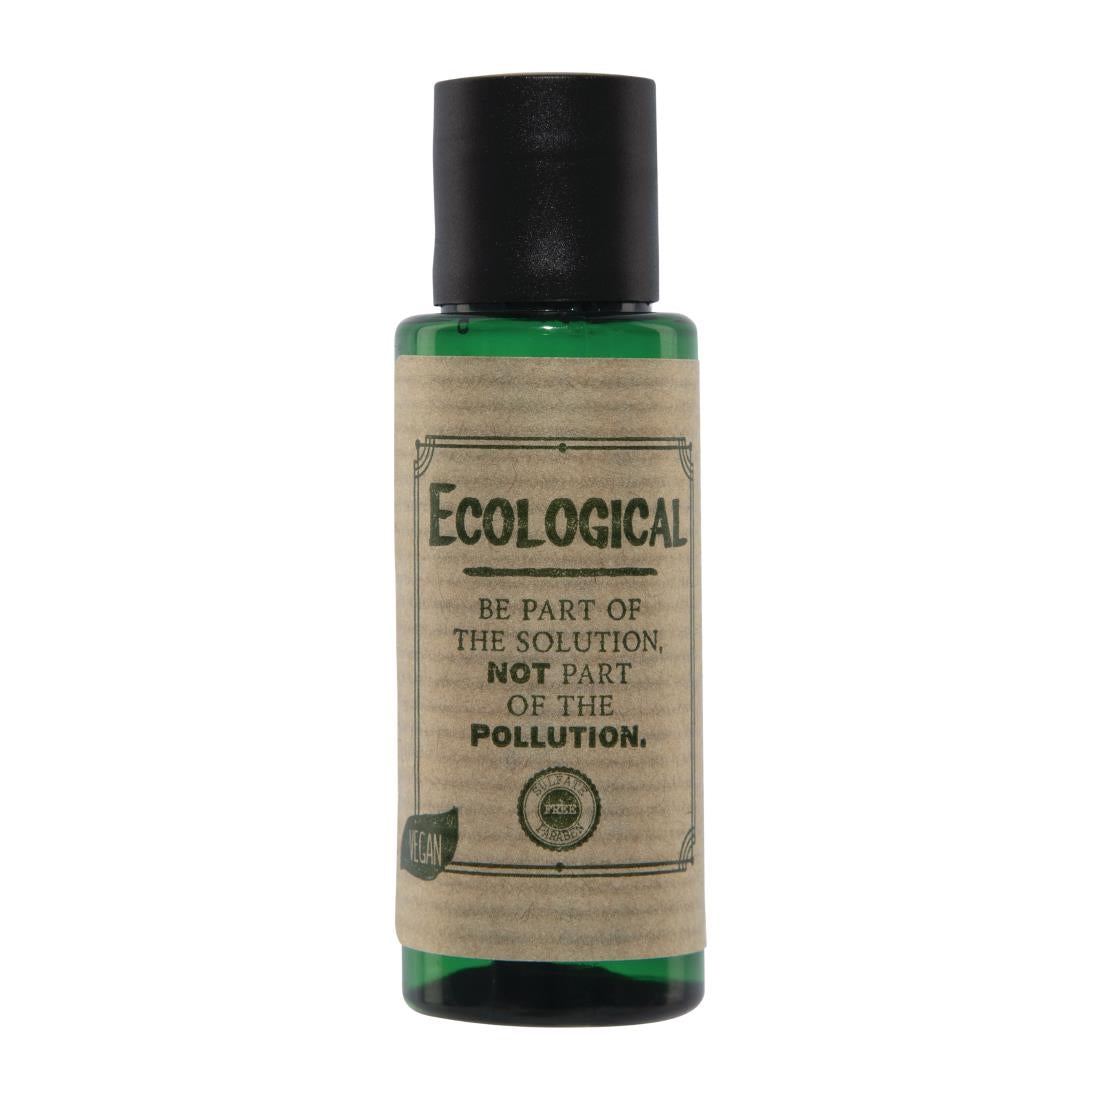 Ecological Shampoo 30ml (Pack of 100) CU213 JD Catering Equipment Solutions Ltd